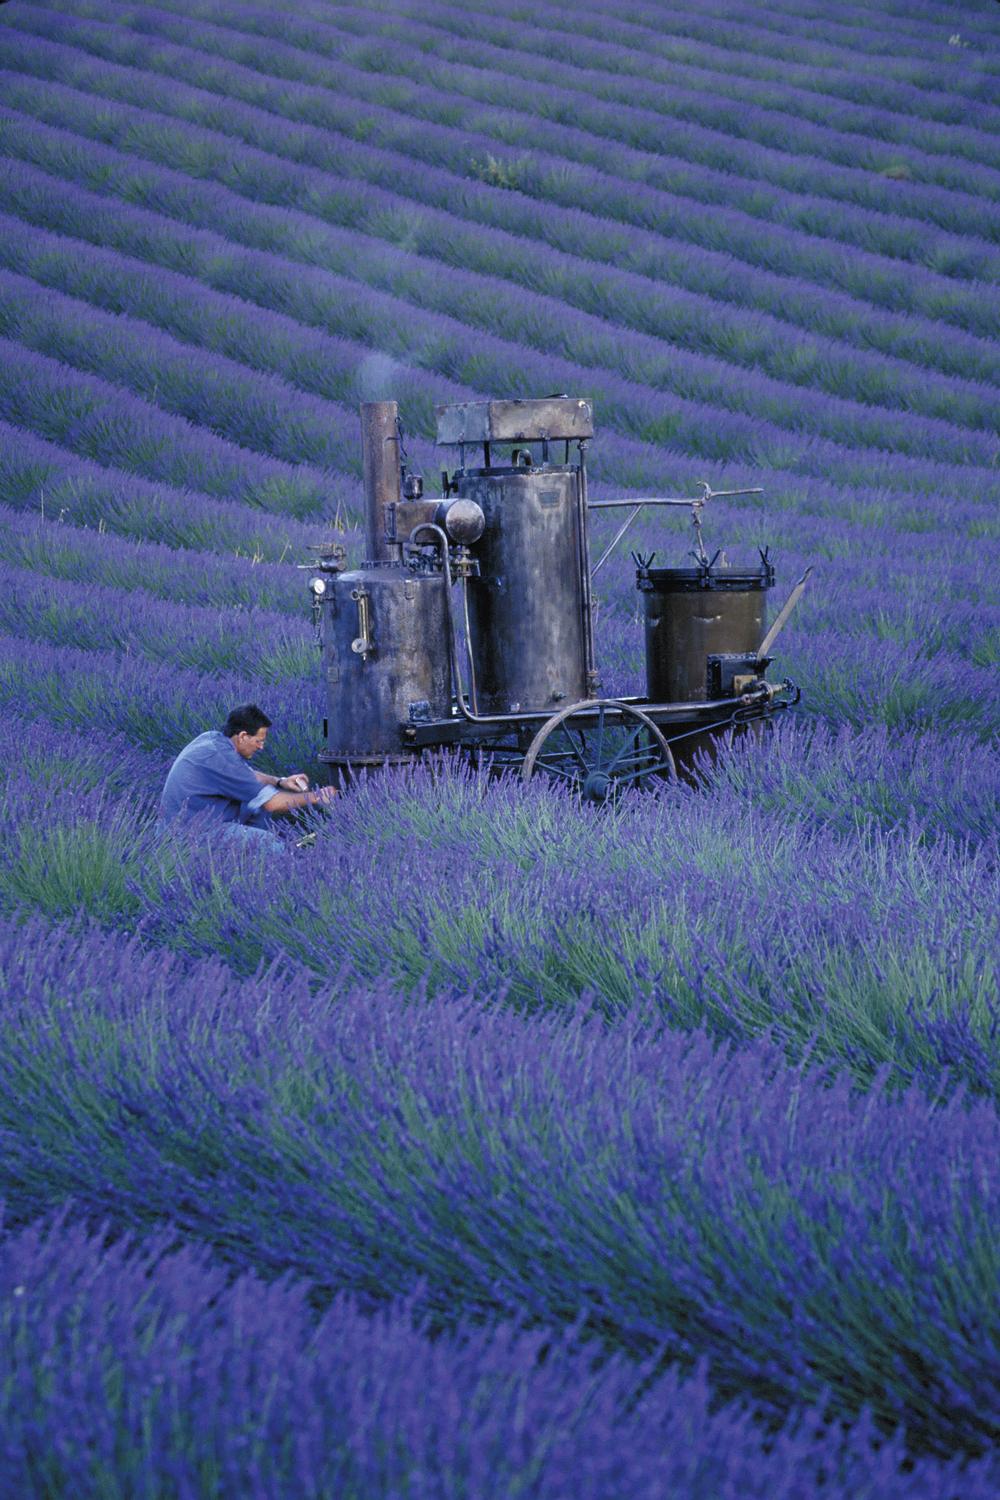 L’Occitane still sources most ingredients in Provence, France 